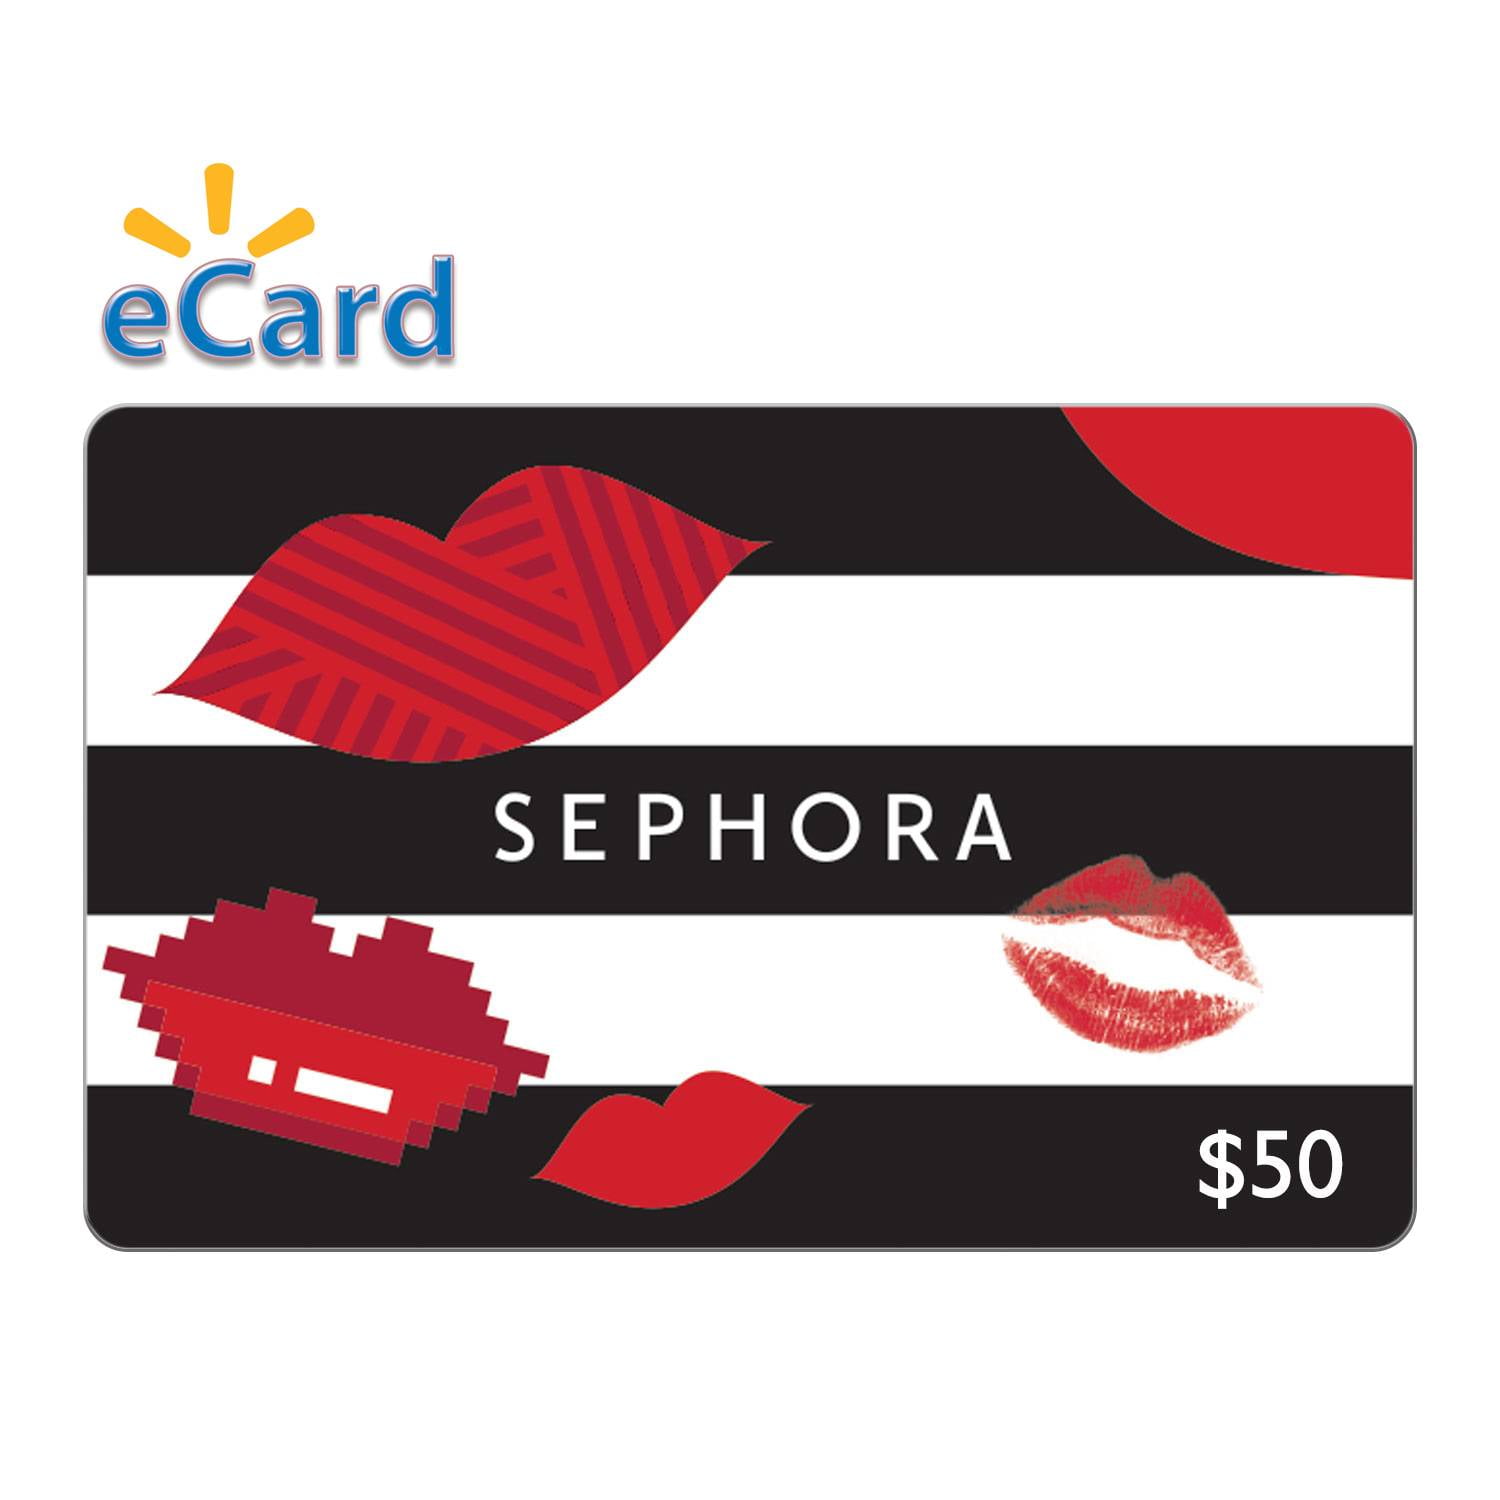 Sephora $50 Gift Card (Email Delivery) - Walmart.com